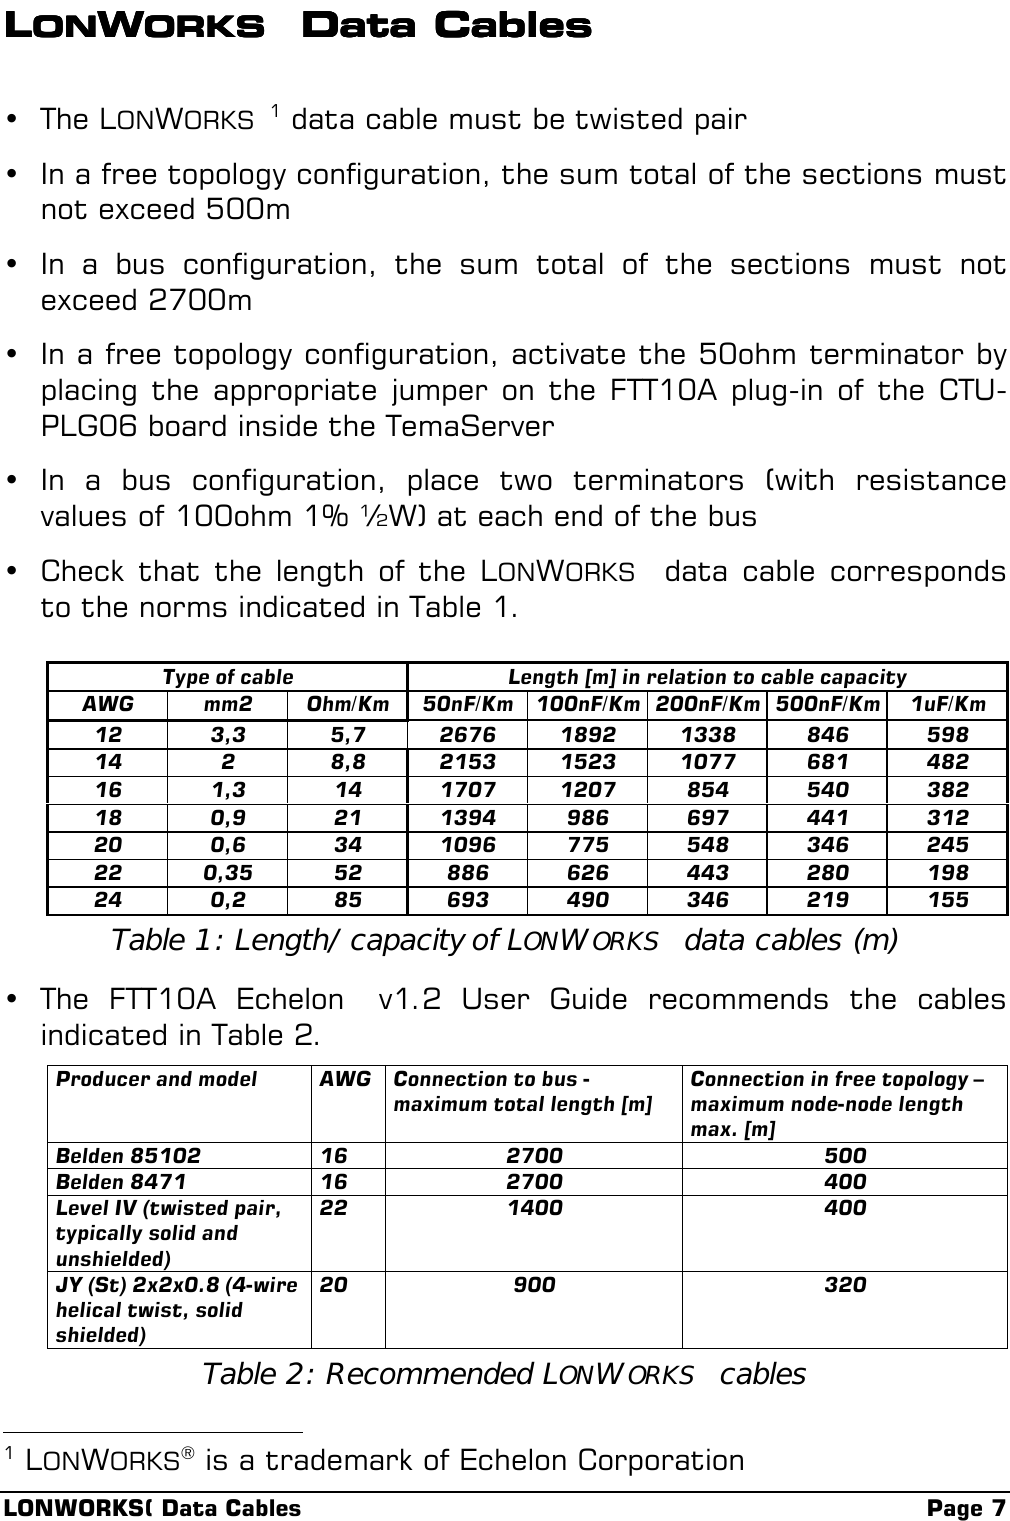 LONWORKS( Data Cables Page 7LLLLONONONONWWWWORKSORKSORKSORKS  Data Cables Data Cables Data Cables Data Cables• The LONWORKS 1 data cable must be twisted pair• In a free topology configuration, the sum total of the sections mustnot exceed 500m• In a bus configuration, the sum total of the sections must notexceed 2700m• In a free topology configuration, activate the 50ohm terminator byplacing the appropriate jumper on the FTT10A plug-in of the CTU-PLG06 board inside the TemaServer• In a bus configuration, place two terminators (with resistancevalues of 100ohm 1% ½W) at each end of the bus• Check that the length of the LONWORKS  data cable correspondsto the norms indicated in Table 1.Type of cable Length [m] in relation to cable capacityAWG mm2 Ohm/Km 50nF/Km 100nF/Km 200nF/Km 500nF/Km 1uF/Km12 3,3 5,7 2676 1892 1338 846 59814 2 8,8 2153 1523 1077 681 48216 1,3 14 1707 1207 854 540 38218 0,9 21 1394 986 697 441 31220 0,6 34 1096 775 548 346 24522 0,35 52 886 626 443 280 19824 0,2 85 693 490 346 219 155Table 1: Length/capacity of LONWORKS  data cables (m)• The FTT10A Echelon  v1.2 User Guide recommends the cablesindicated in Table 2.Producer and model AWG Connection to bus -maximum total length [m]Connection in free topology –maximum node-node lengthmax. [m]Belden 85102 16 2700 500Belden 8471 16 2700 400Level IV (twisted pair,typically solid andunshielded)22 1400 400JY (St) 2x2x0.8 (4-wirehelical twist, solidshielded)20 900 320Table 2: Recommended LONWORKS  cables                                                           1 LONWORKS® is a trademark of Echelon Corporation